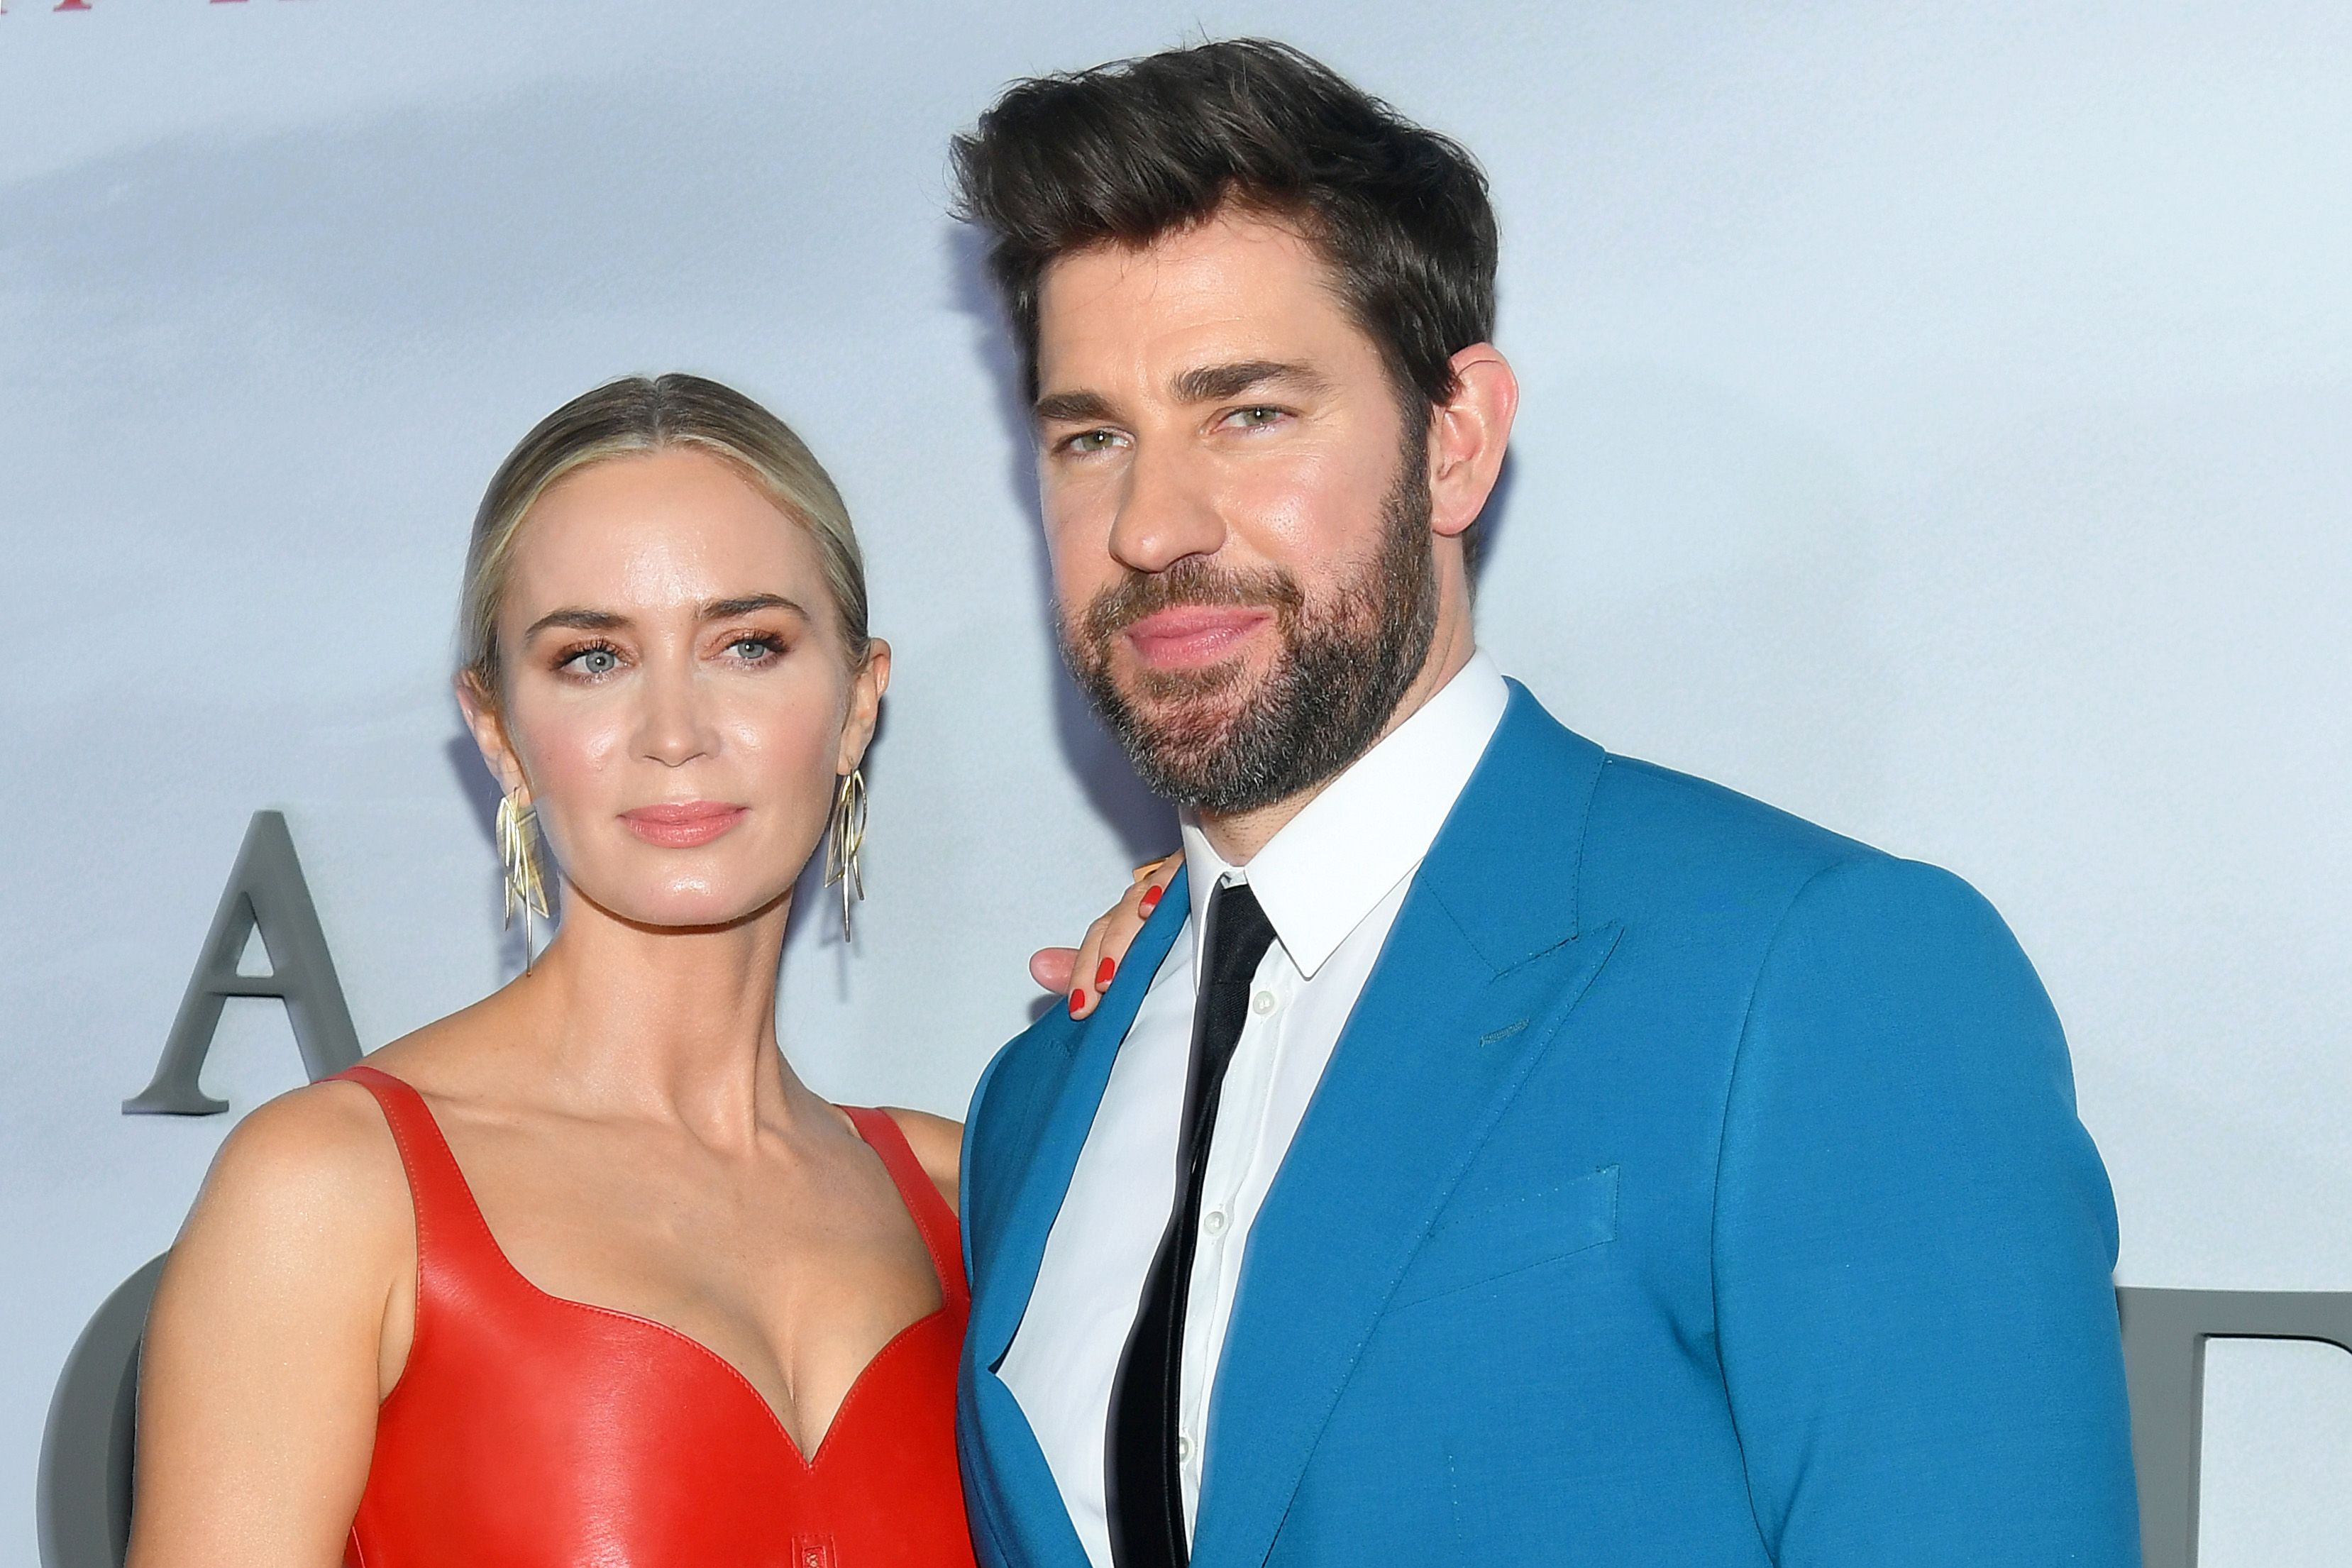 Emily Blunt and John Krasinski on March 08, 2020 in New York City. | Source: Getty Images